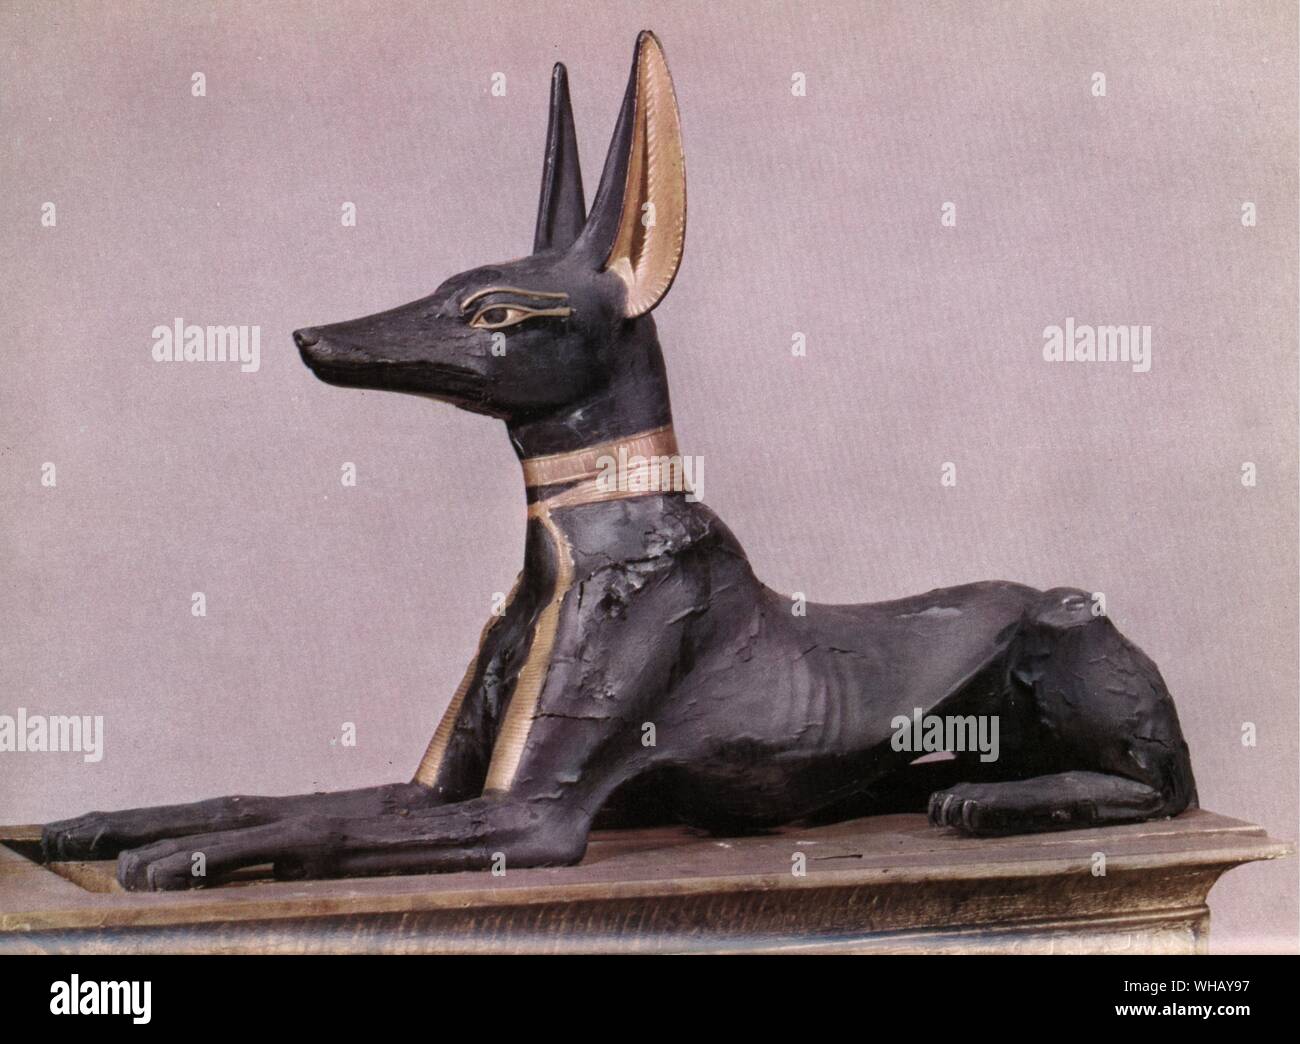 Tutankhamen in the form of the dog Anubis during the course of his transformations. Tukankhamen, by Christiane Desroches Noblecourt, page 252.. Anubis, is the Greek name for the ancient god of the underworld in Egyptian mythology, who guided and protected the spirits of the dead. The hieroglyphic is more accurately spelt Anpu (also Anup, Anupu, Wip, Ienpw, Inepu, Yinepu, or Inpw). Prayers to Anubis have been found carved on the most ancient tombs in Egypt. Anubis was painted black to further link him with the deceased - a body that has been embalmed became a pitch black colour. Black was also Stock Photo